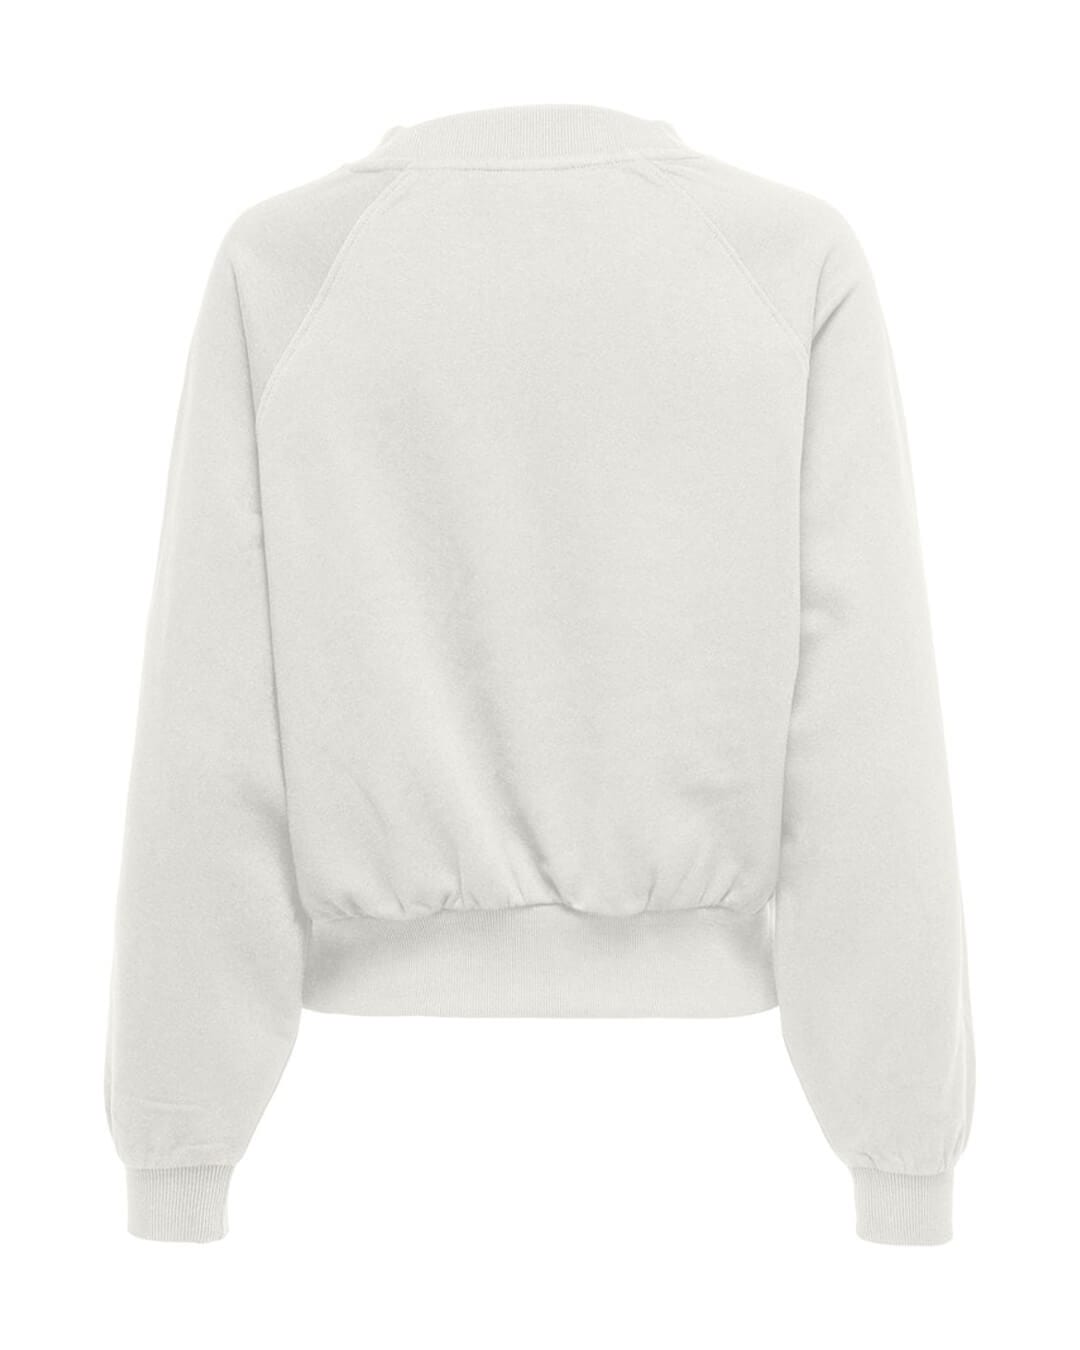 Only Jumpers Only Cama White Shine Crew Neck Sweatshirt